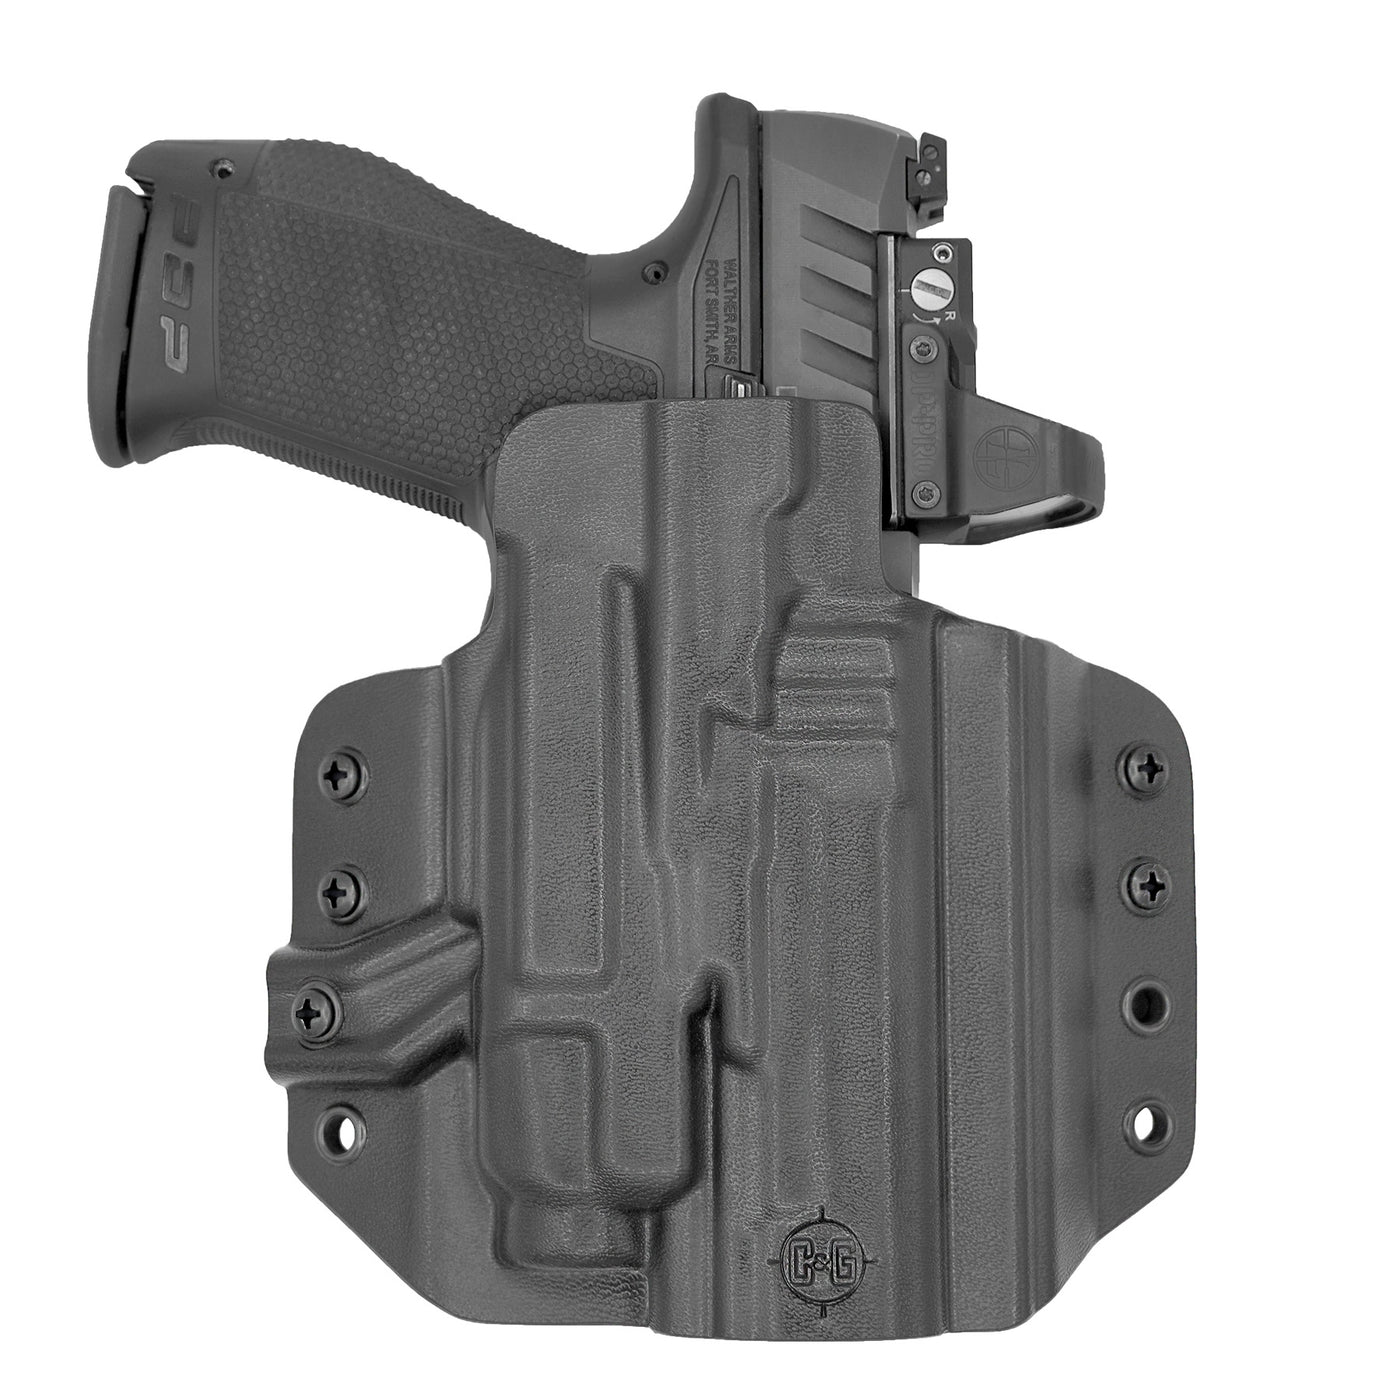 C&G Holsters custom OWB Tactical M&P 9/40 Streamlight TLR7/A In holstered position